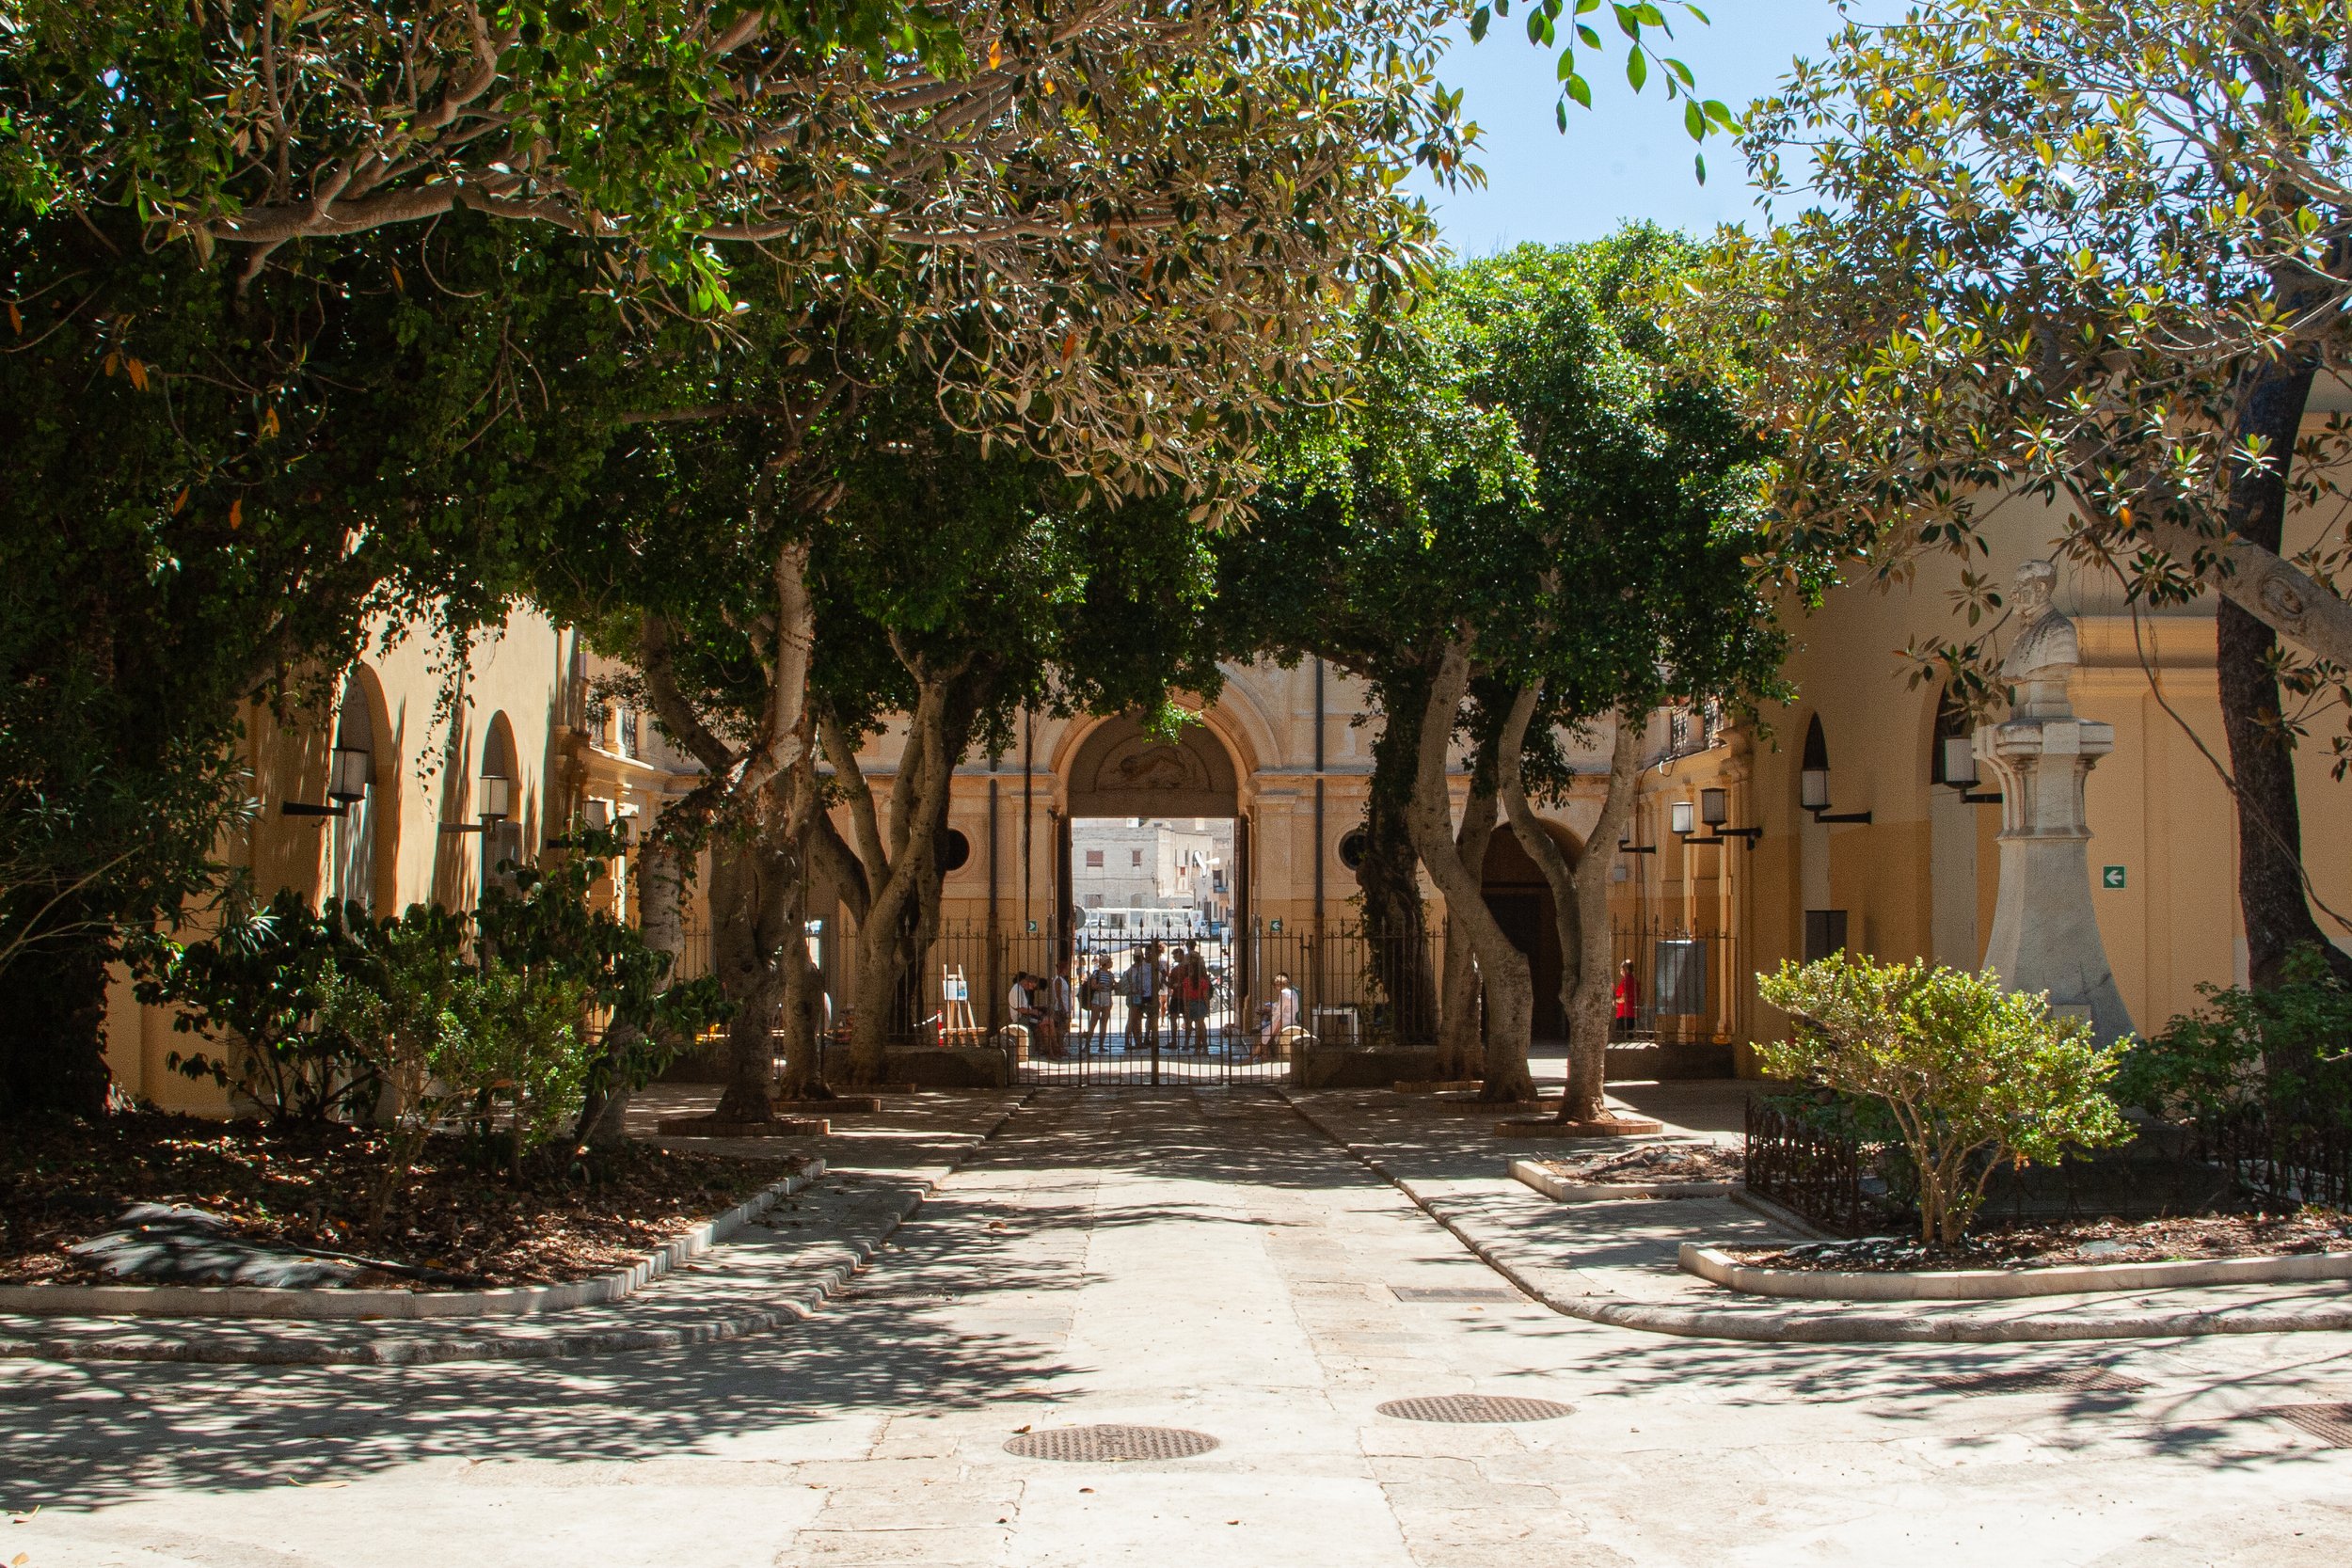  Figure 24. The lush courtyard at the entry to the Tonnara di Favignana. As this tonnara was Sicily’s most successful throughout the nineteenth and twentieth centuries, the entrance was quite ornate. Photograph by G. Vaccarino Gearty, 2022. 